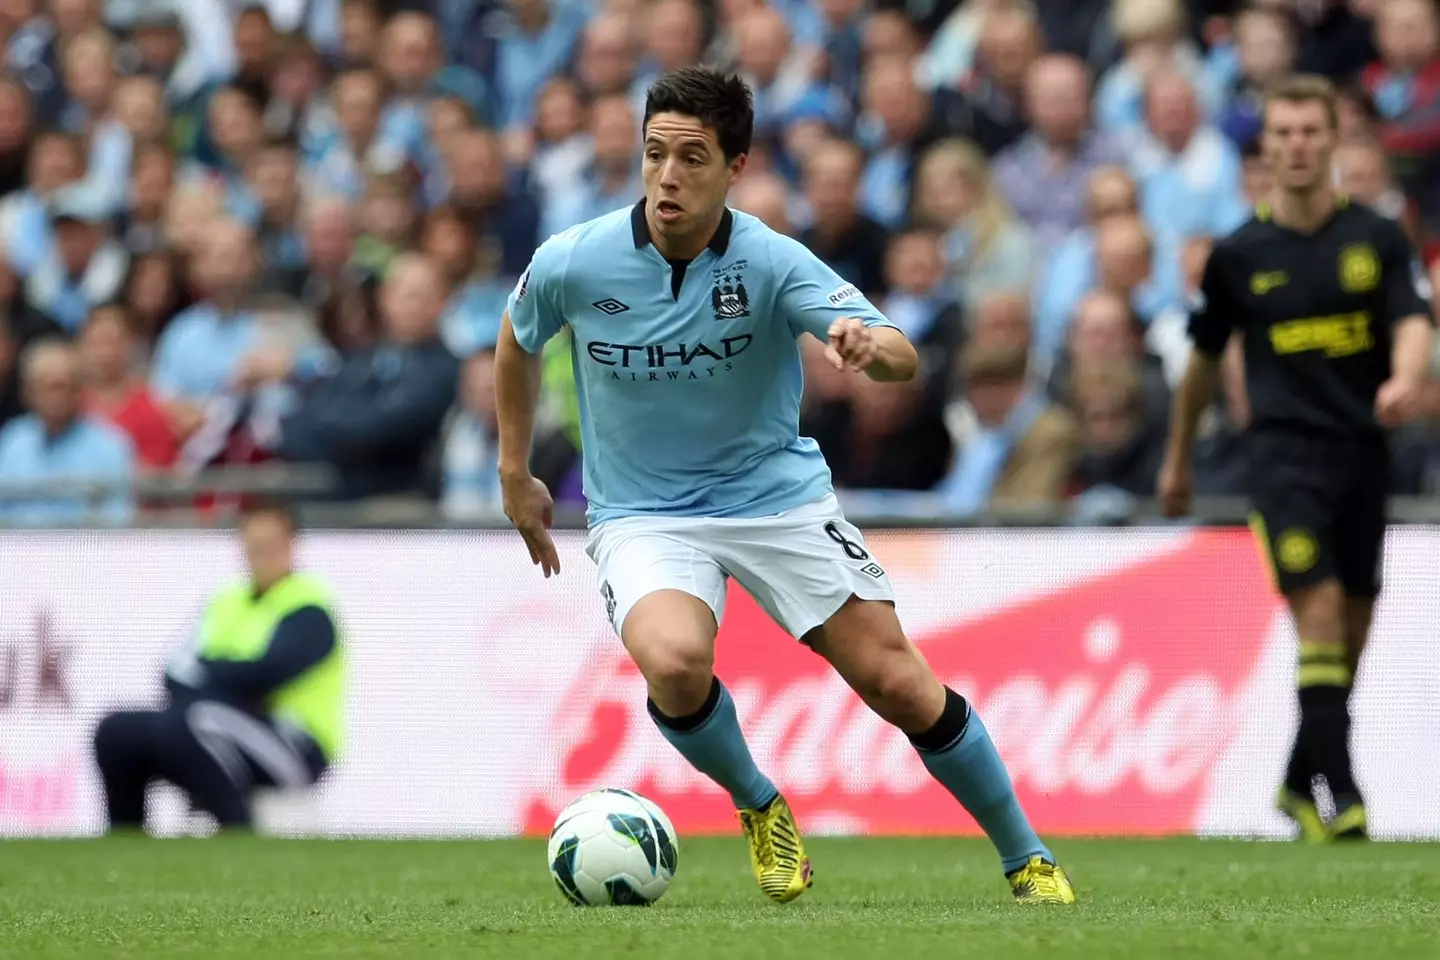 Samir Nasri made 176 appearances for Manchester City during his six years at the Premier League club.